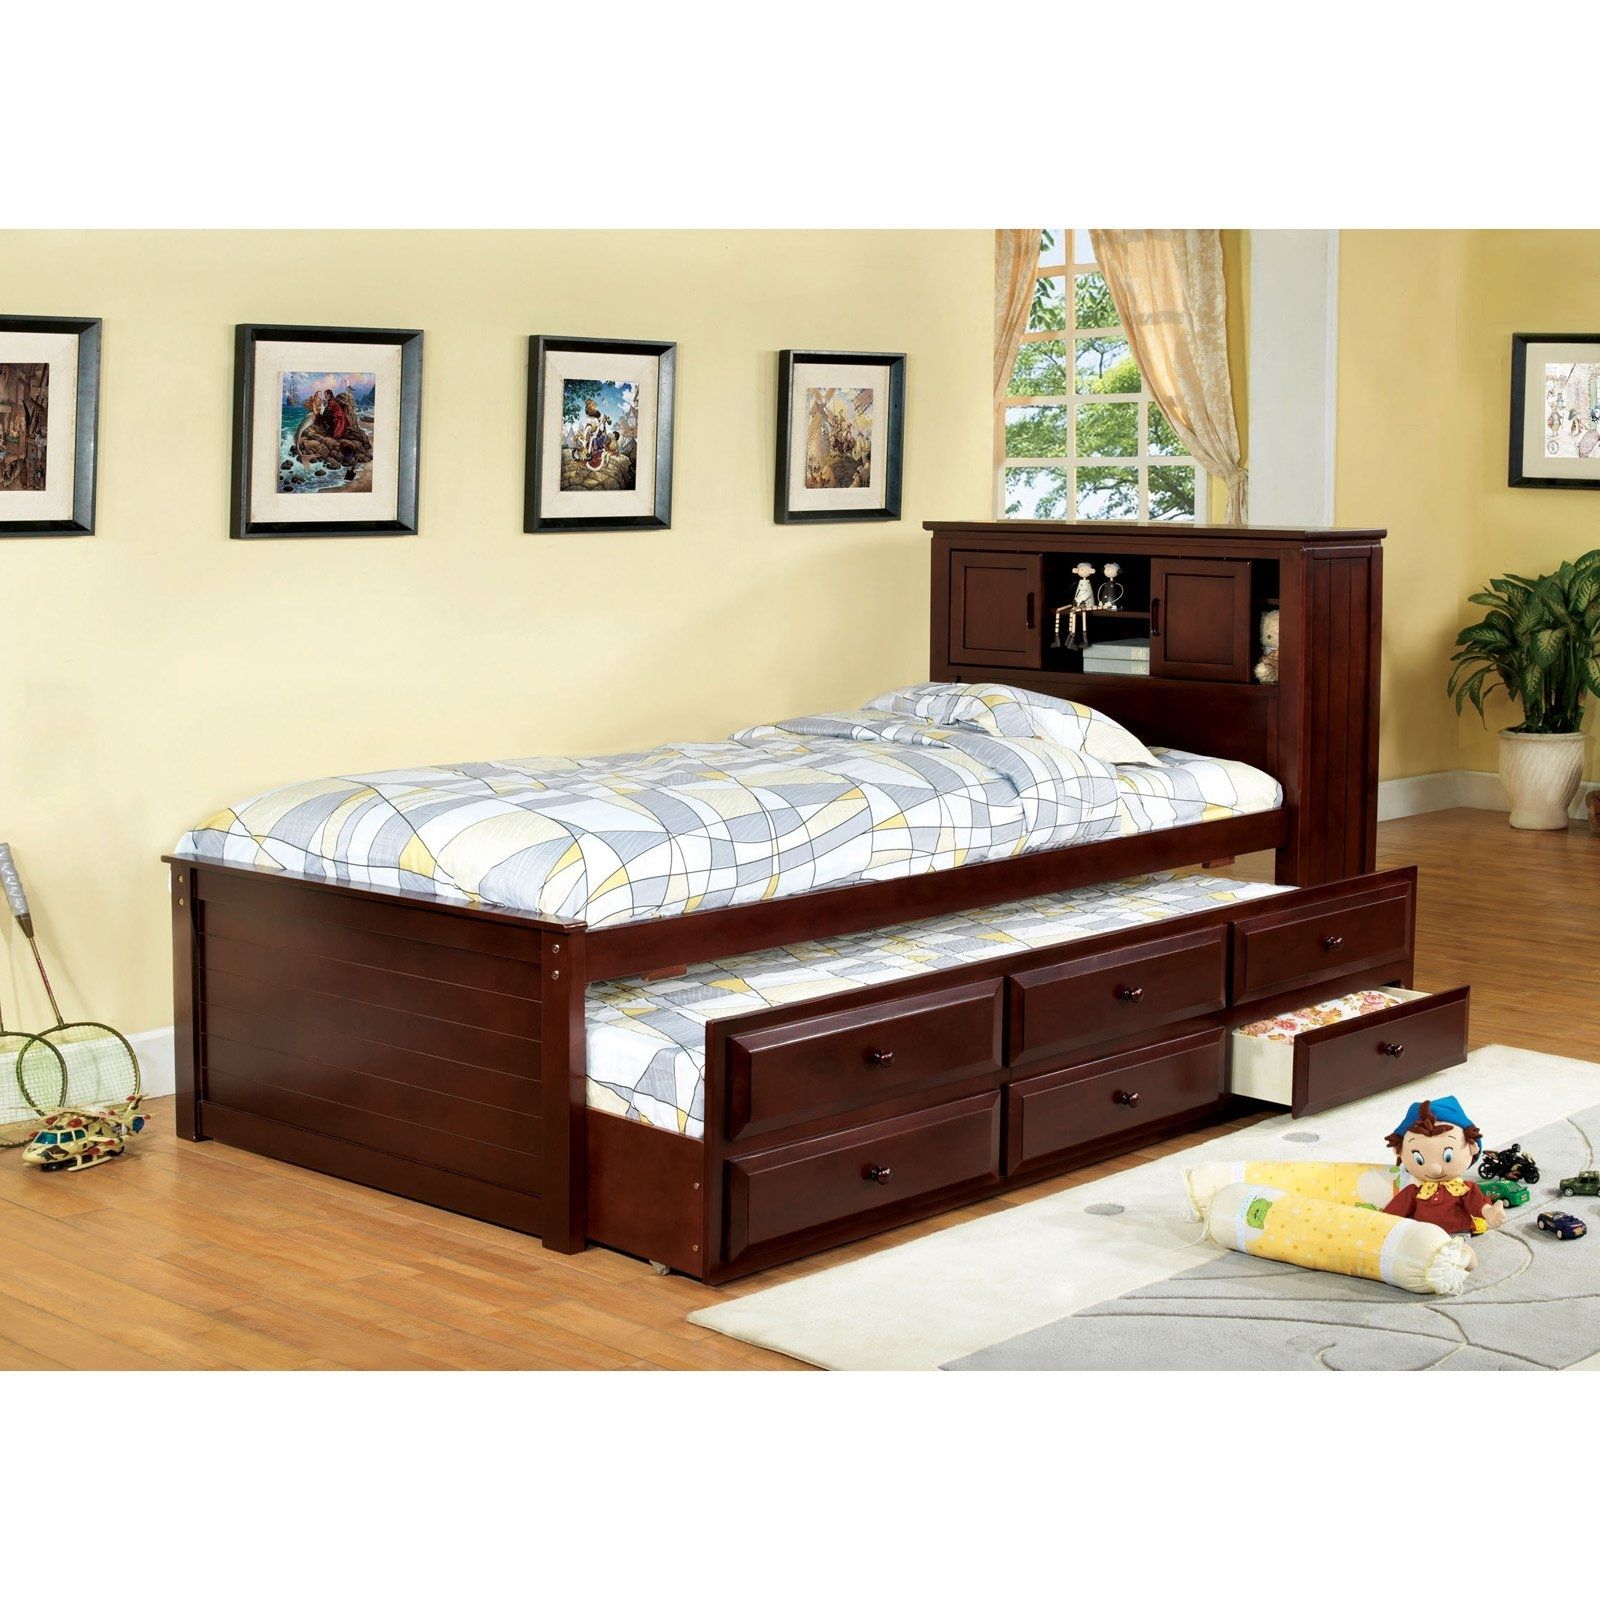 Furniture Of America Brighton Twin Bookcase Headboard Storage Bed Regarding Favorite Storage Bed With Bookcases Headboard (View 7 of 15)